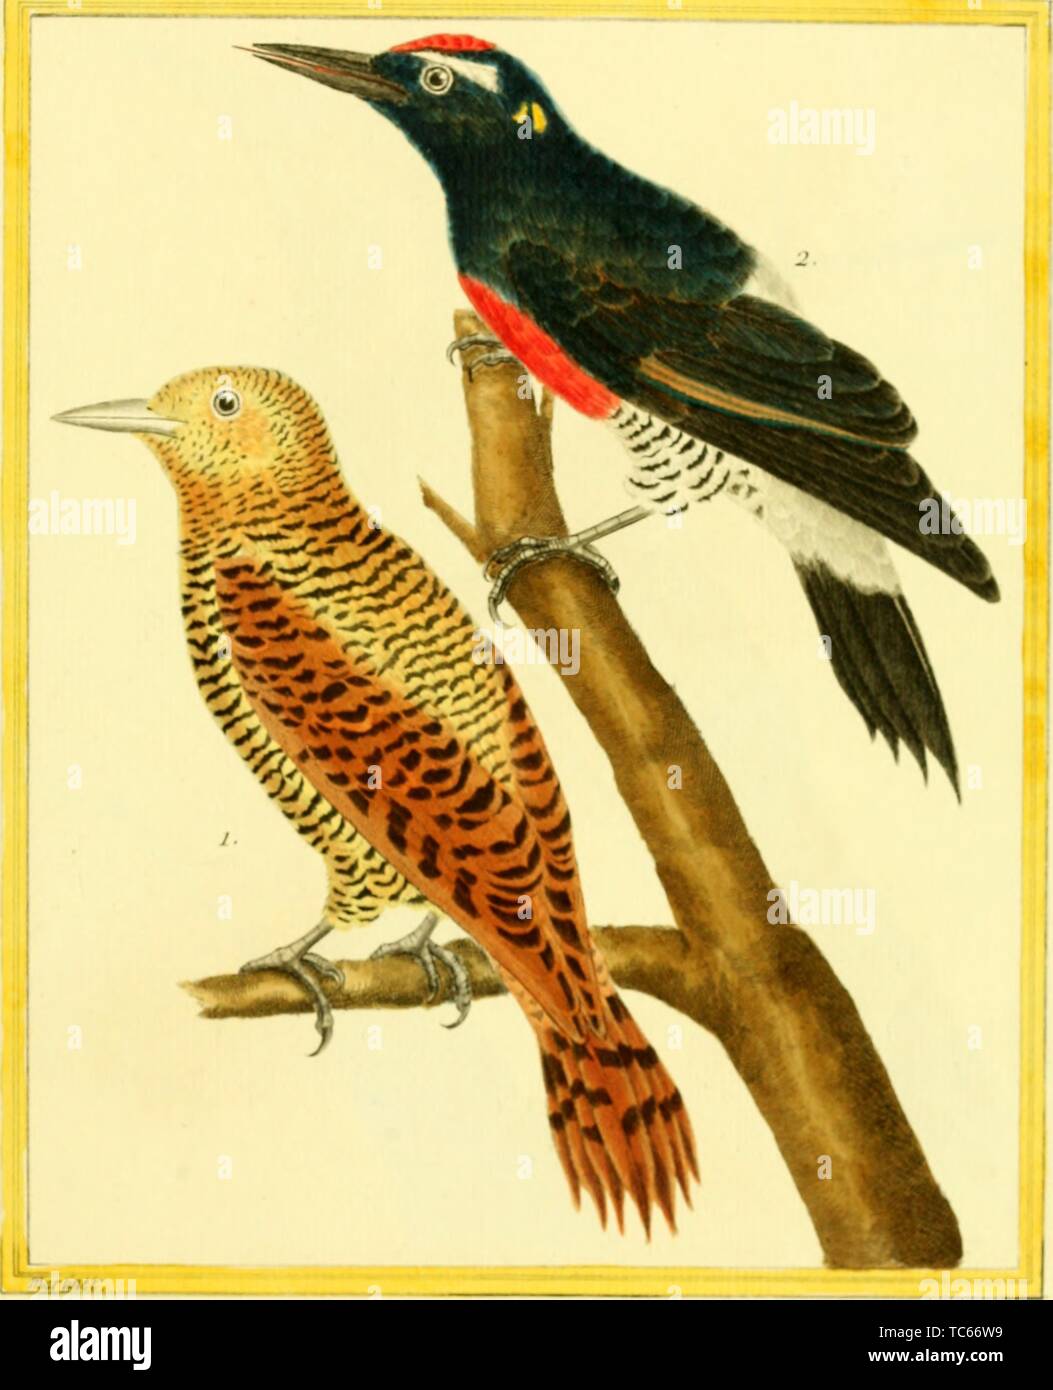 Engraved drawings of the Chestnut-colored Woodpecker (Celeus castaneus) and Black Woodpecker (Dryocopus martius), from the book 'Planches enluminees Dhistoire naturelle' by Francois Nicolas, Louis Jean Marie Daubenton, and Edme-Louis Daubenton, 1765. Courtesy Internet Archive. () Stock Photo